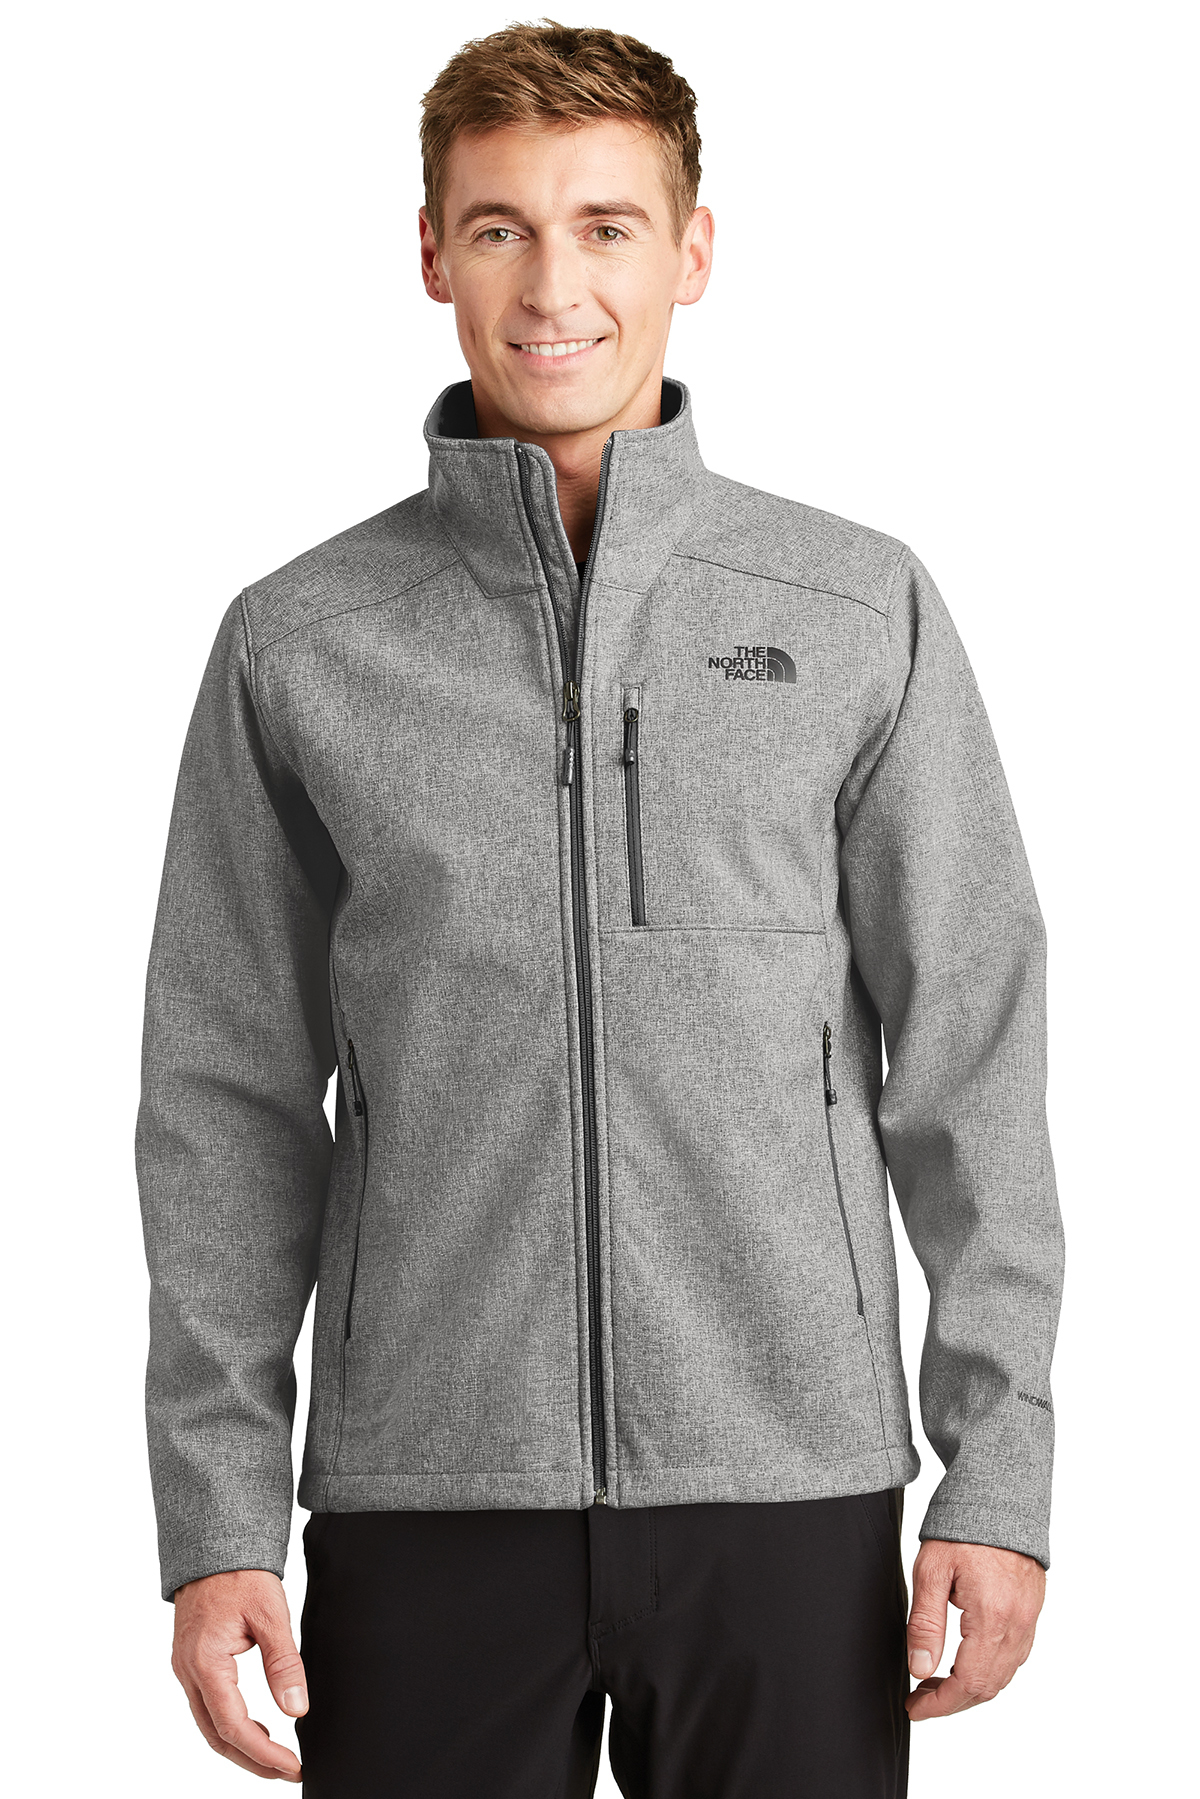 the north face apex soft shell jacket